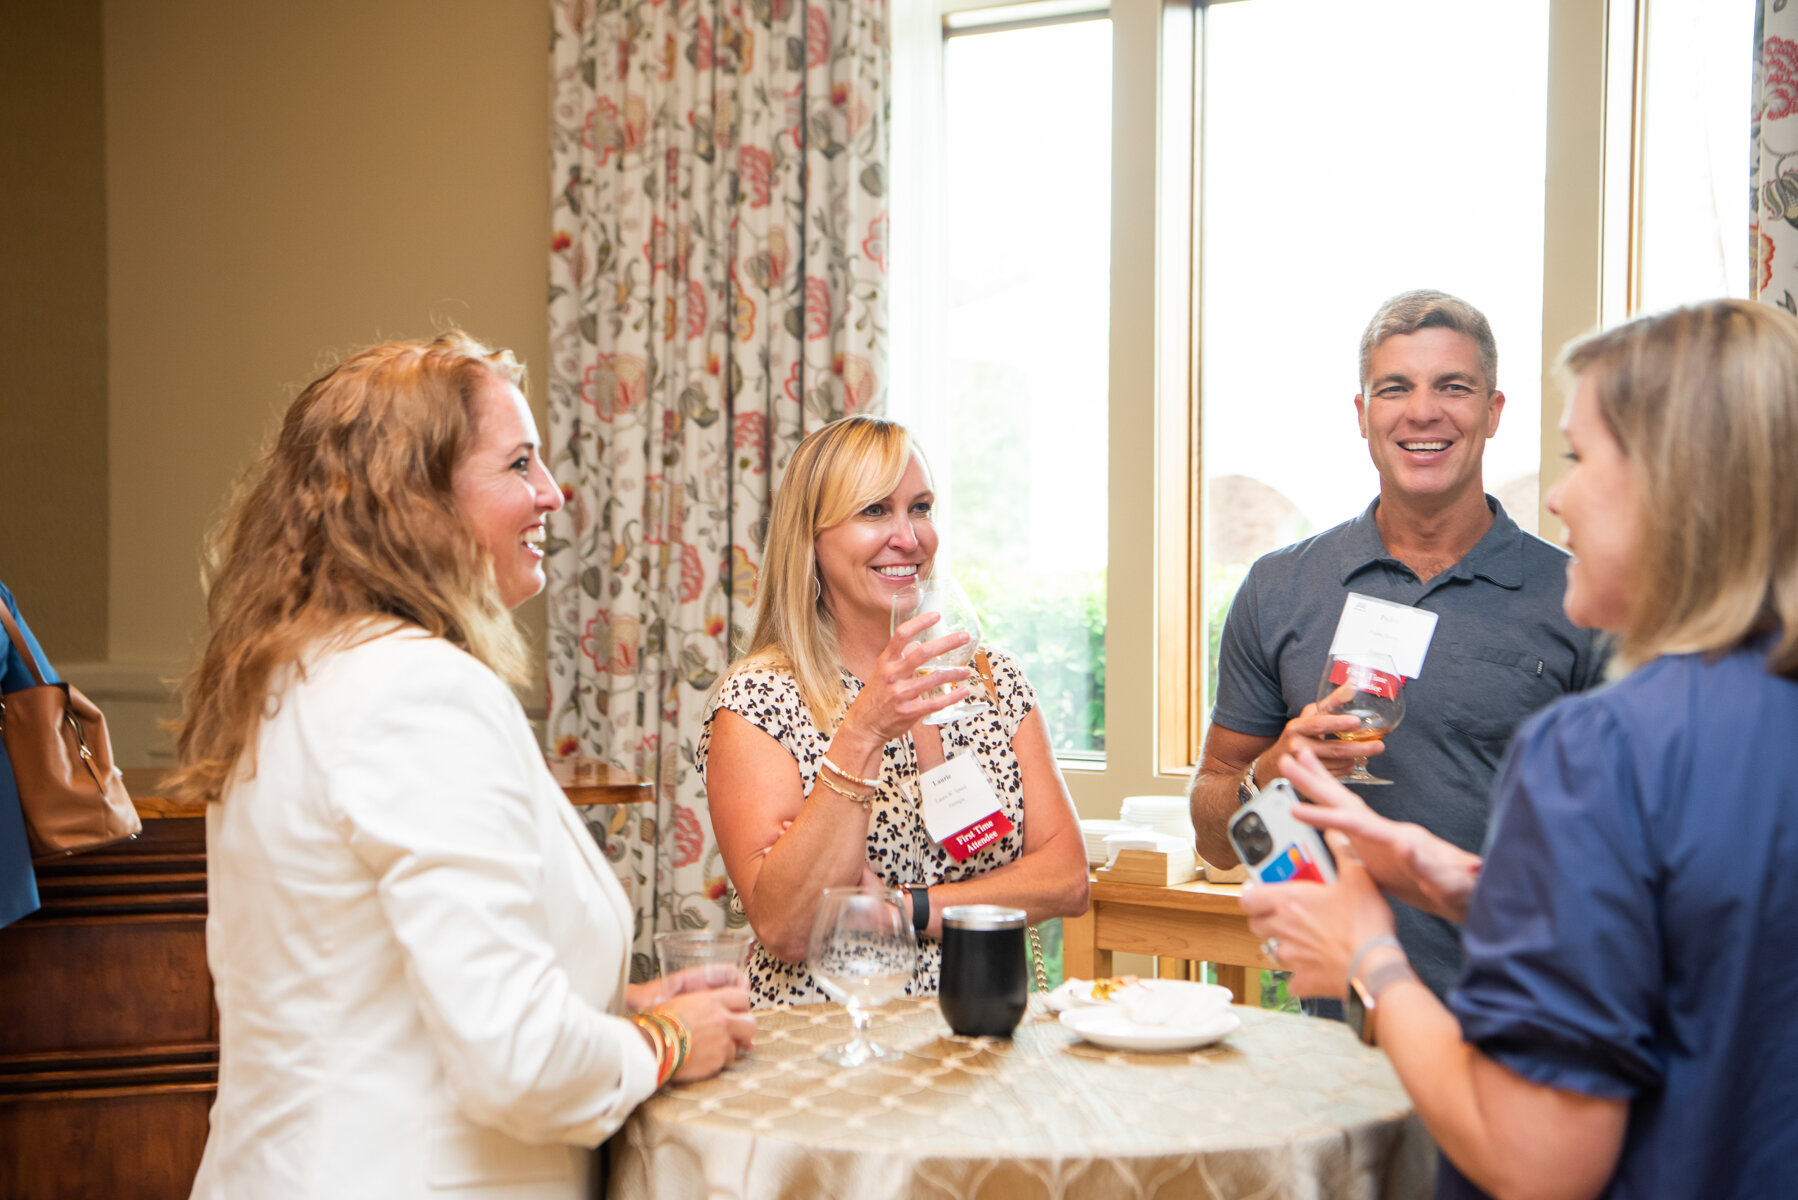 Corporate event photography by Reese Moore Photography